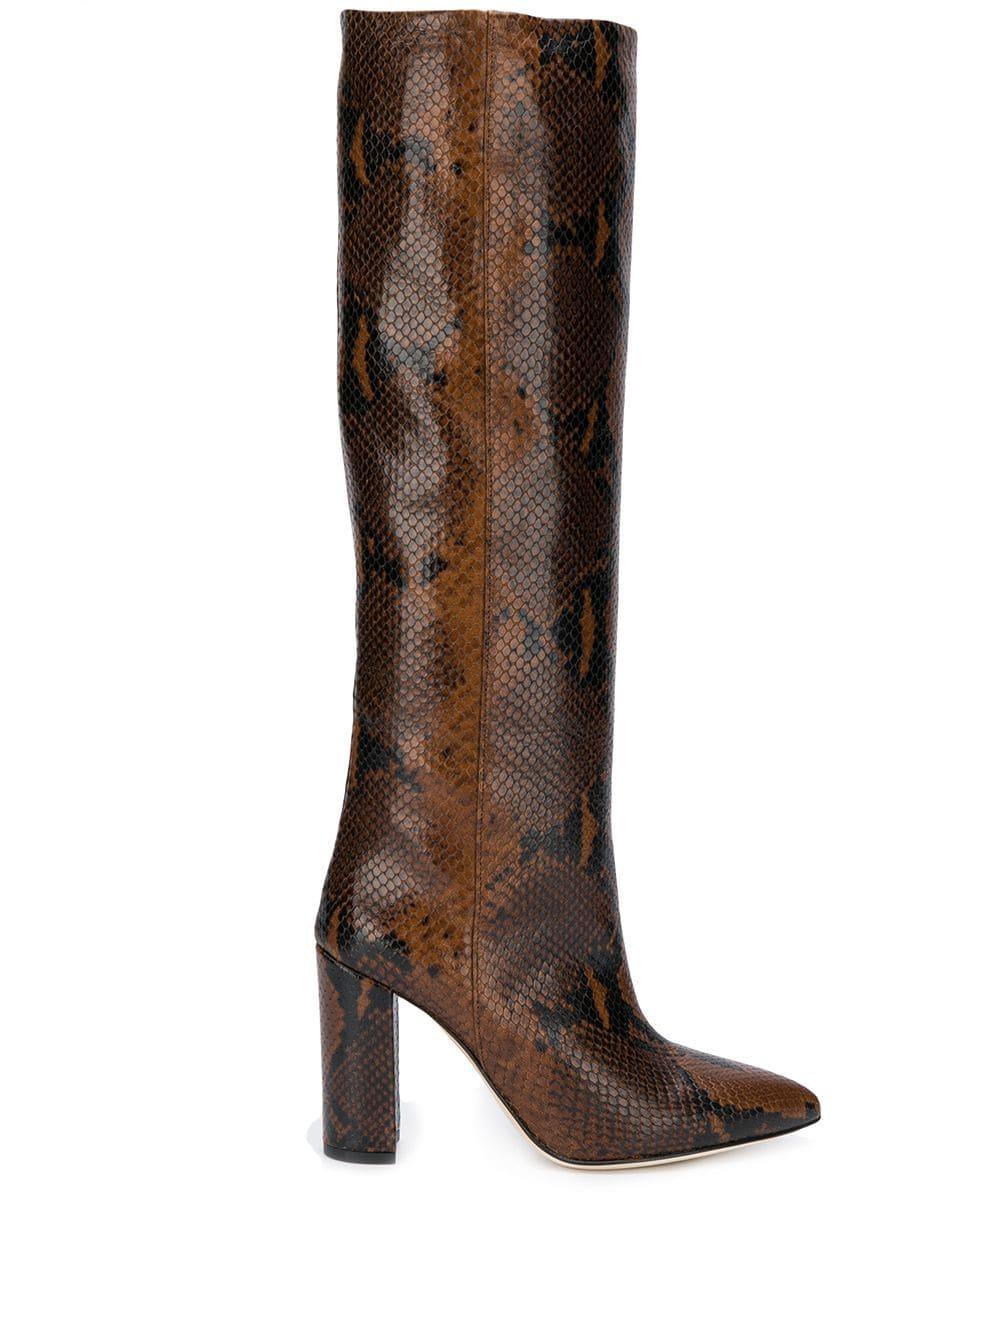 Paris Texas Leather Snakeskin Effect Boots in Brown - Save 39% - Lyst